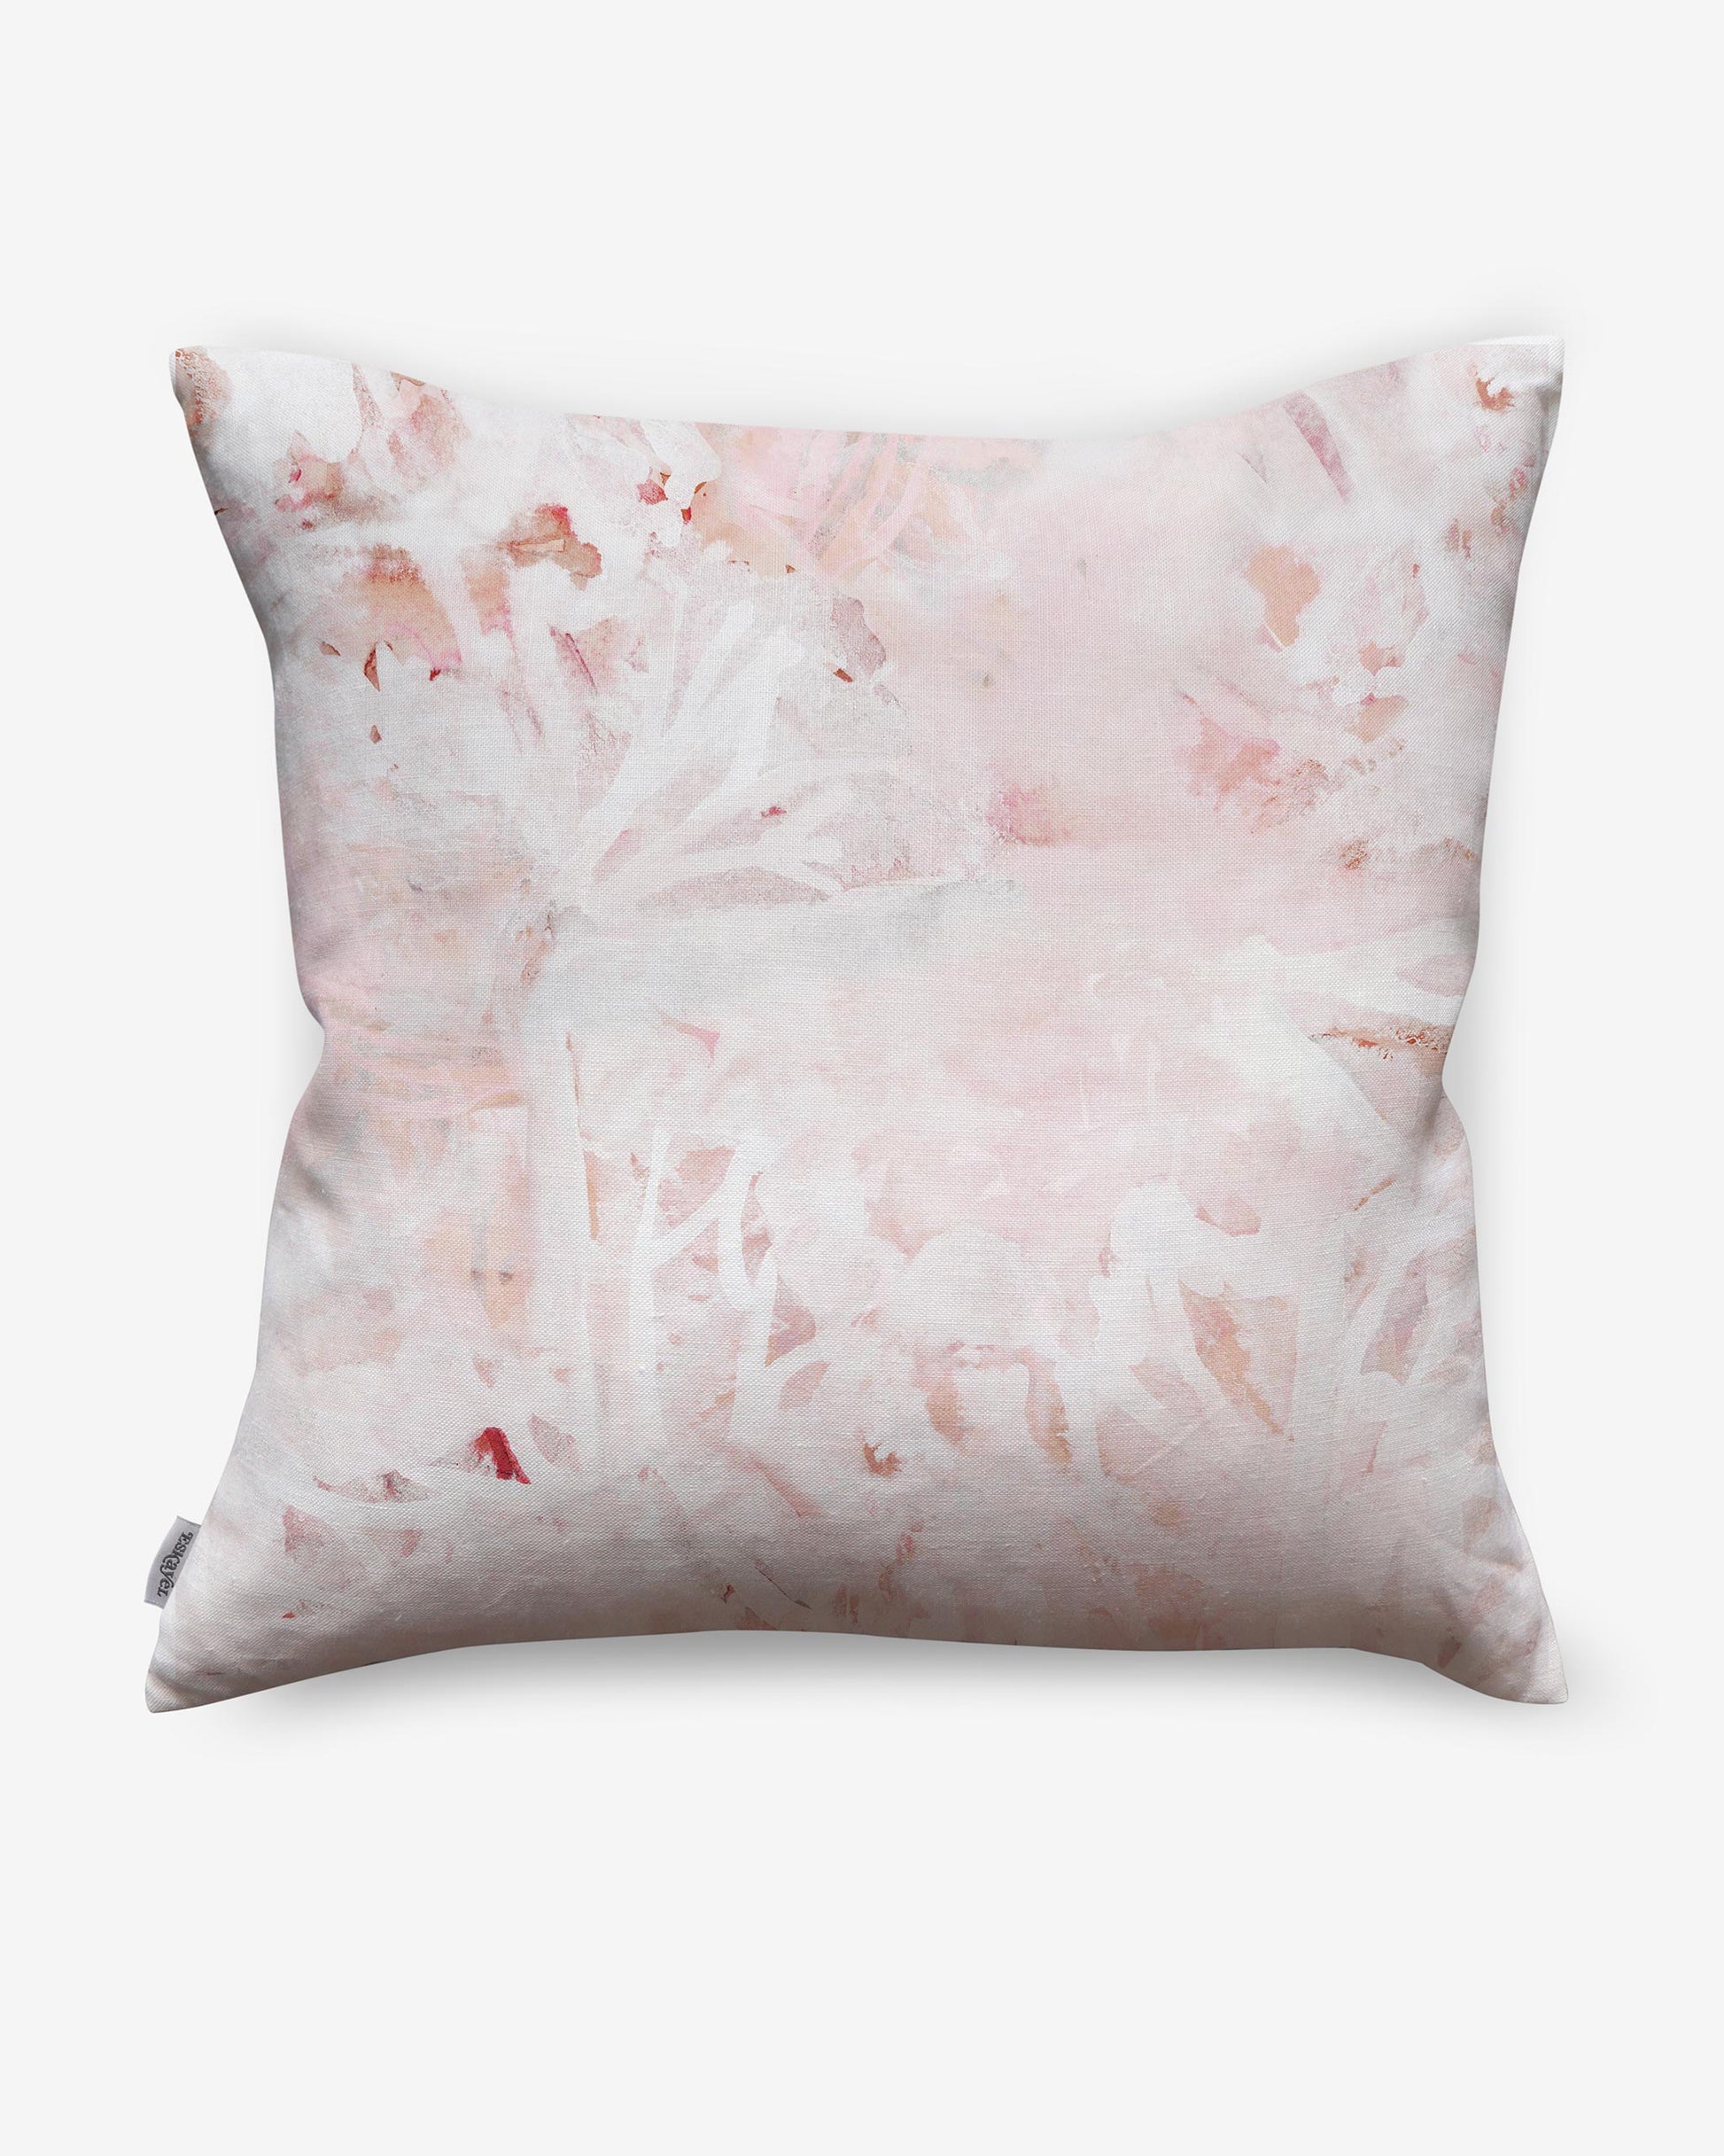 A pink and white Cortile Pillow Pelle with a floral pattern